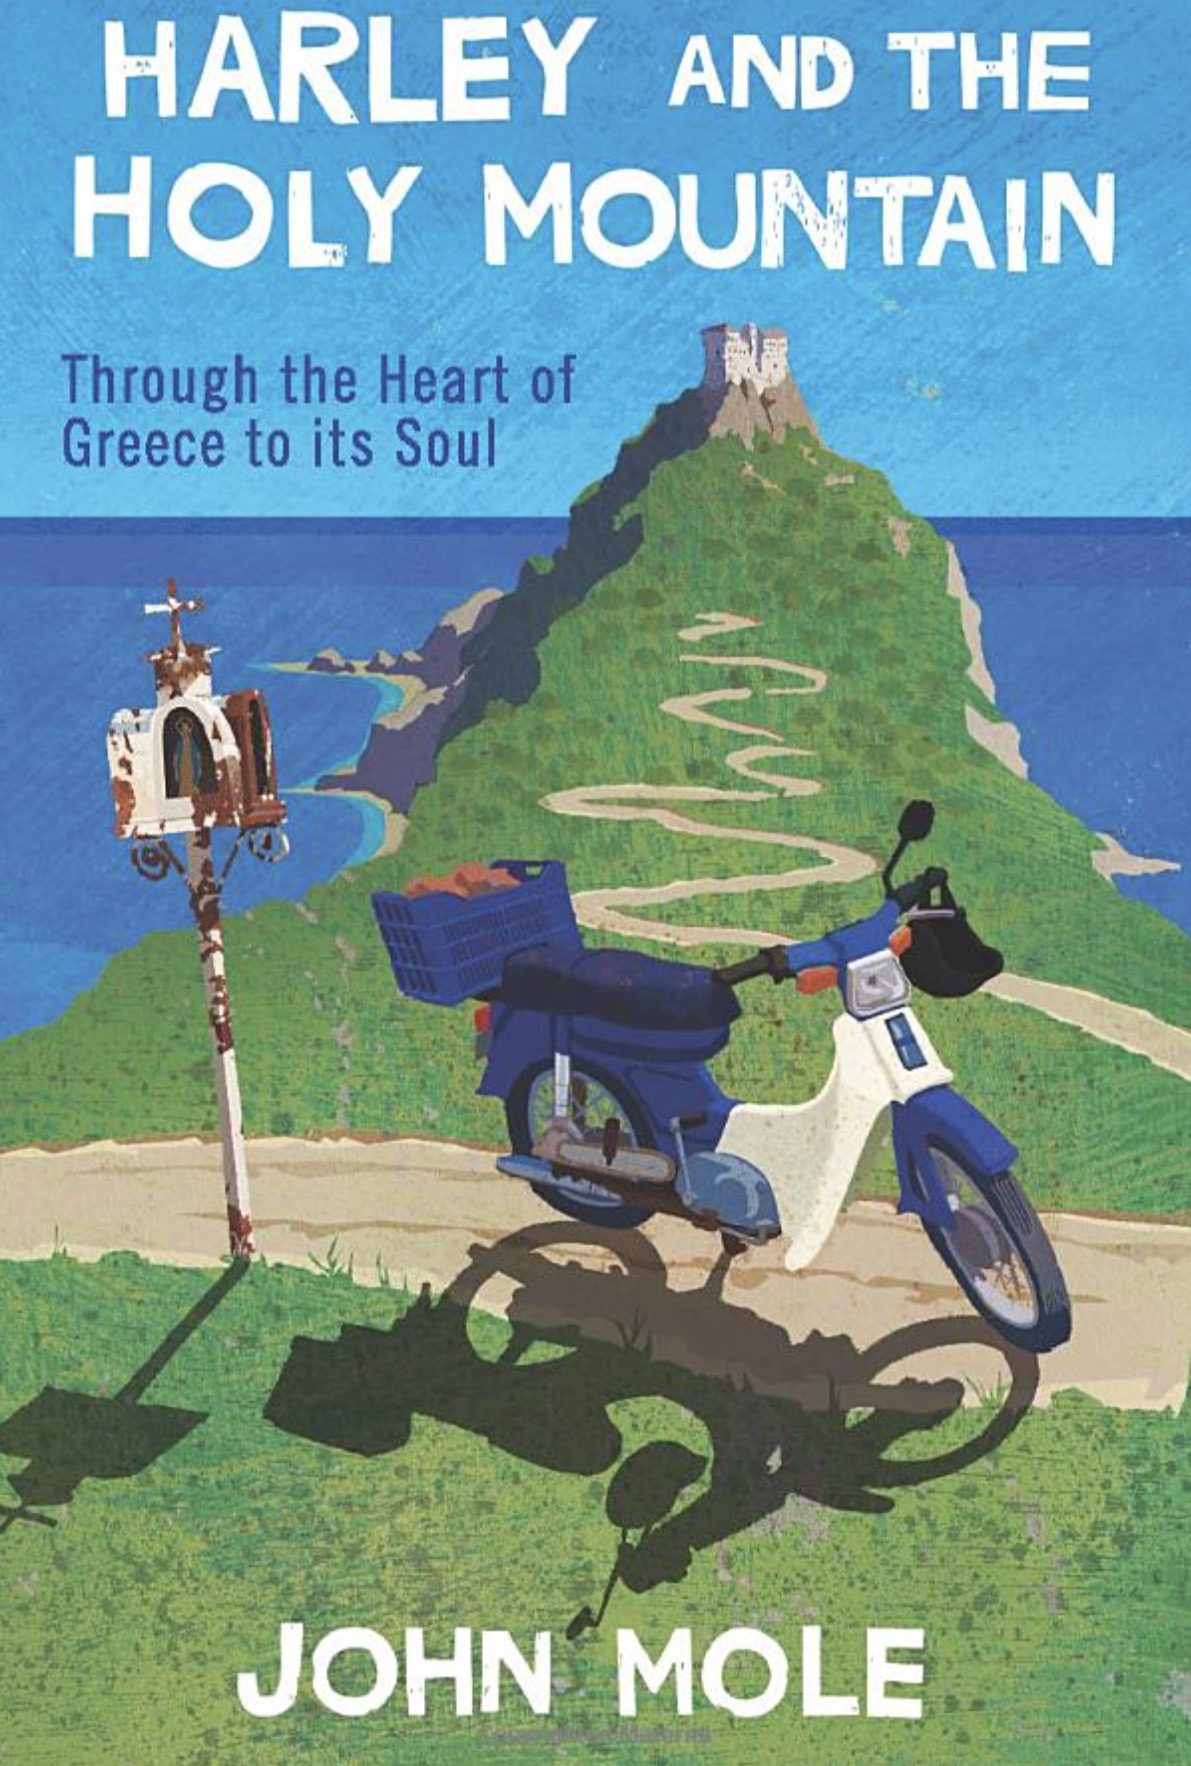 John Mole’s book ‘Harley and the Holy Mountain: Through the Heart of Greece to its Soul’